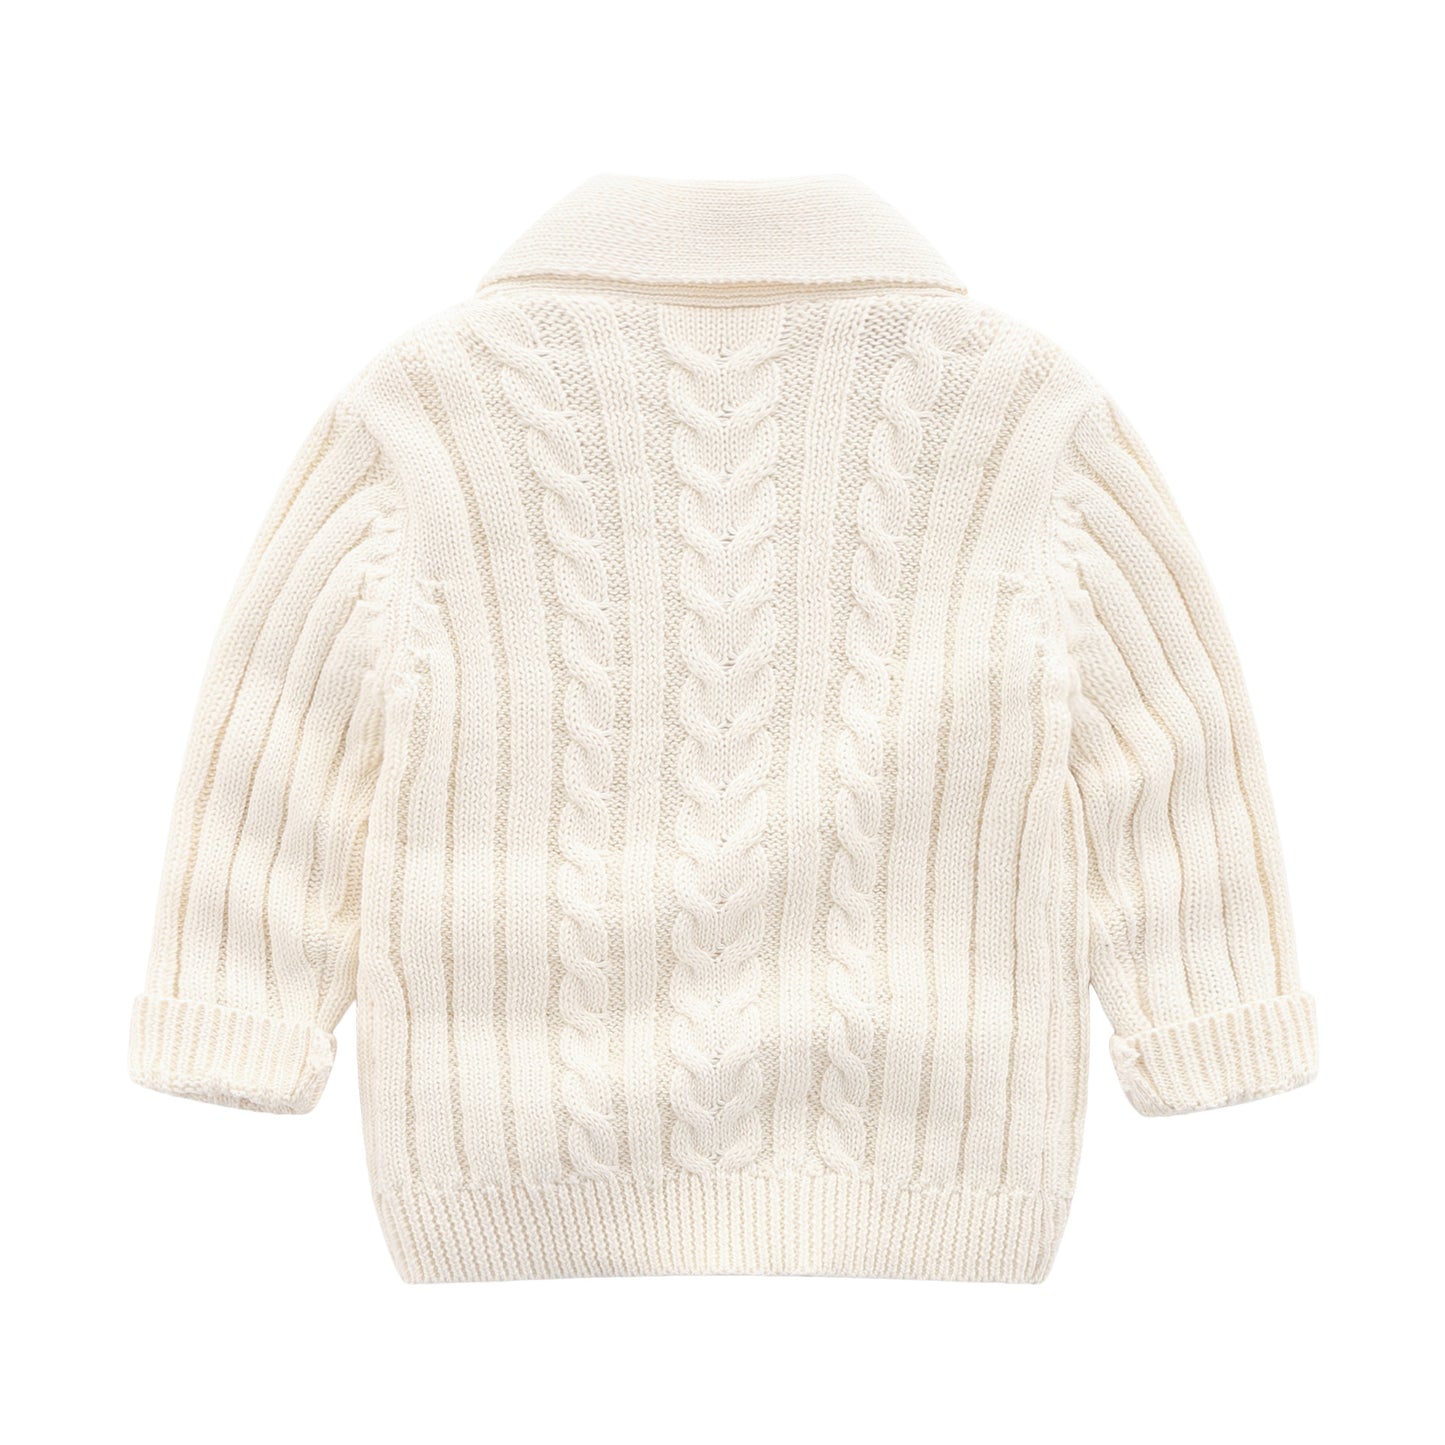 Baby and Toddler Stylish Knitted Cardigan Sweater for Autumn and Winter